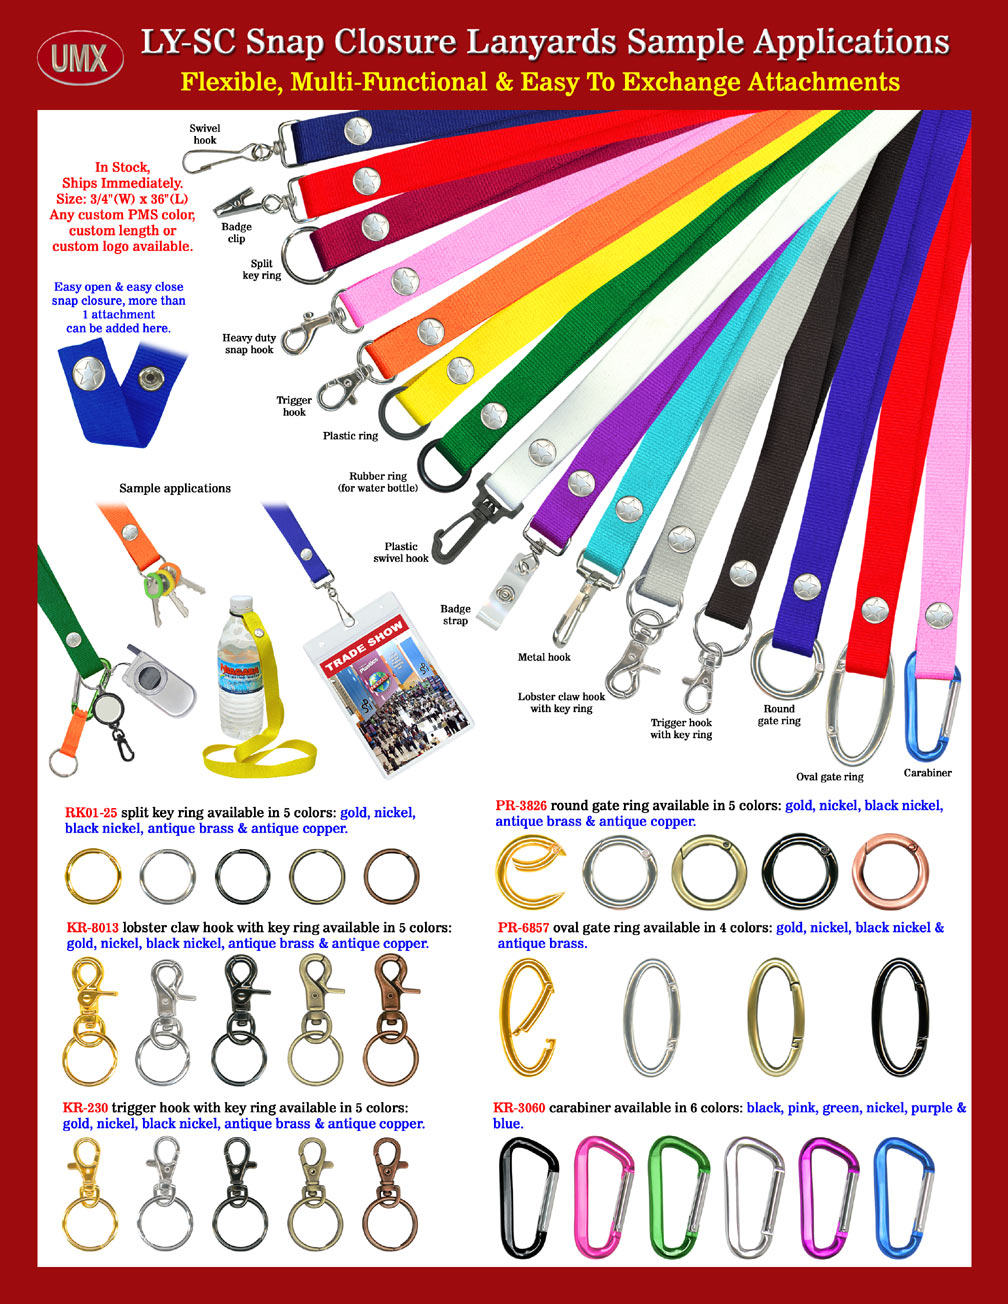 Snap closure lanyards, we have custom Pantone PMS color of lanyards and custom imprinting service with fast delivery schedule available!